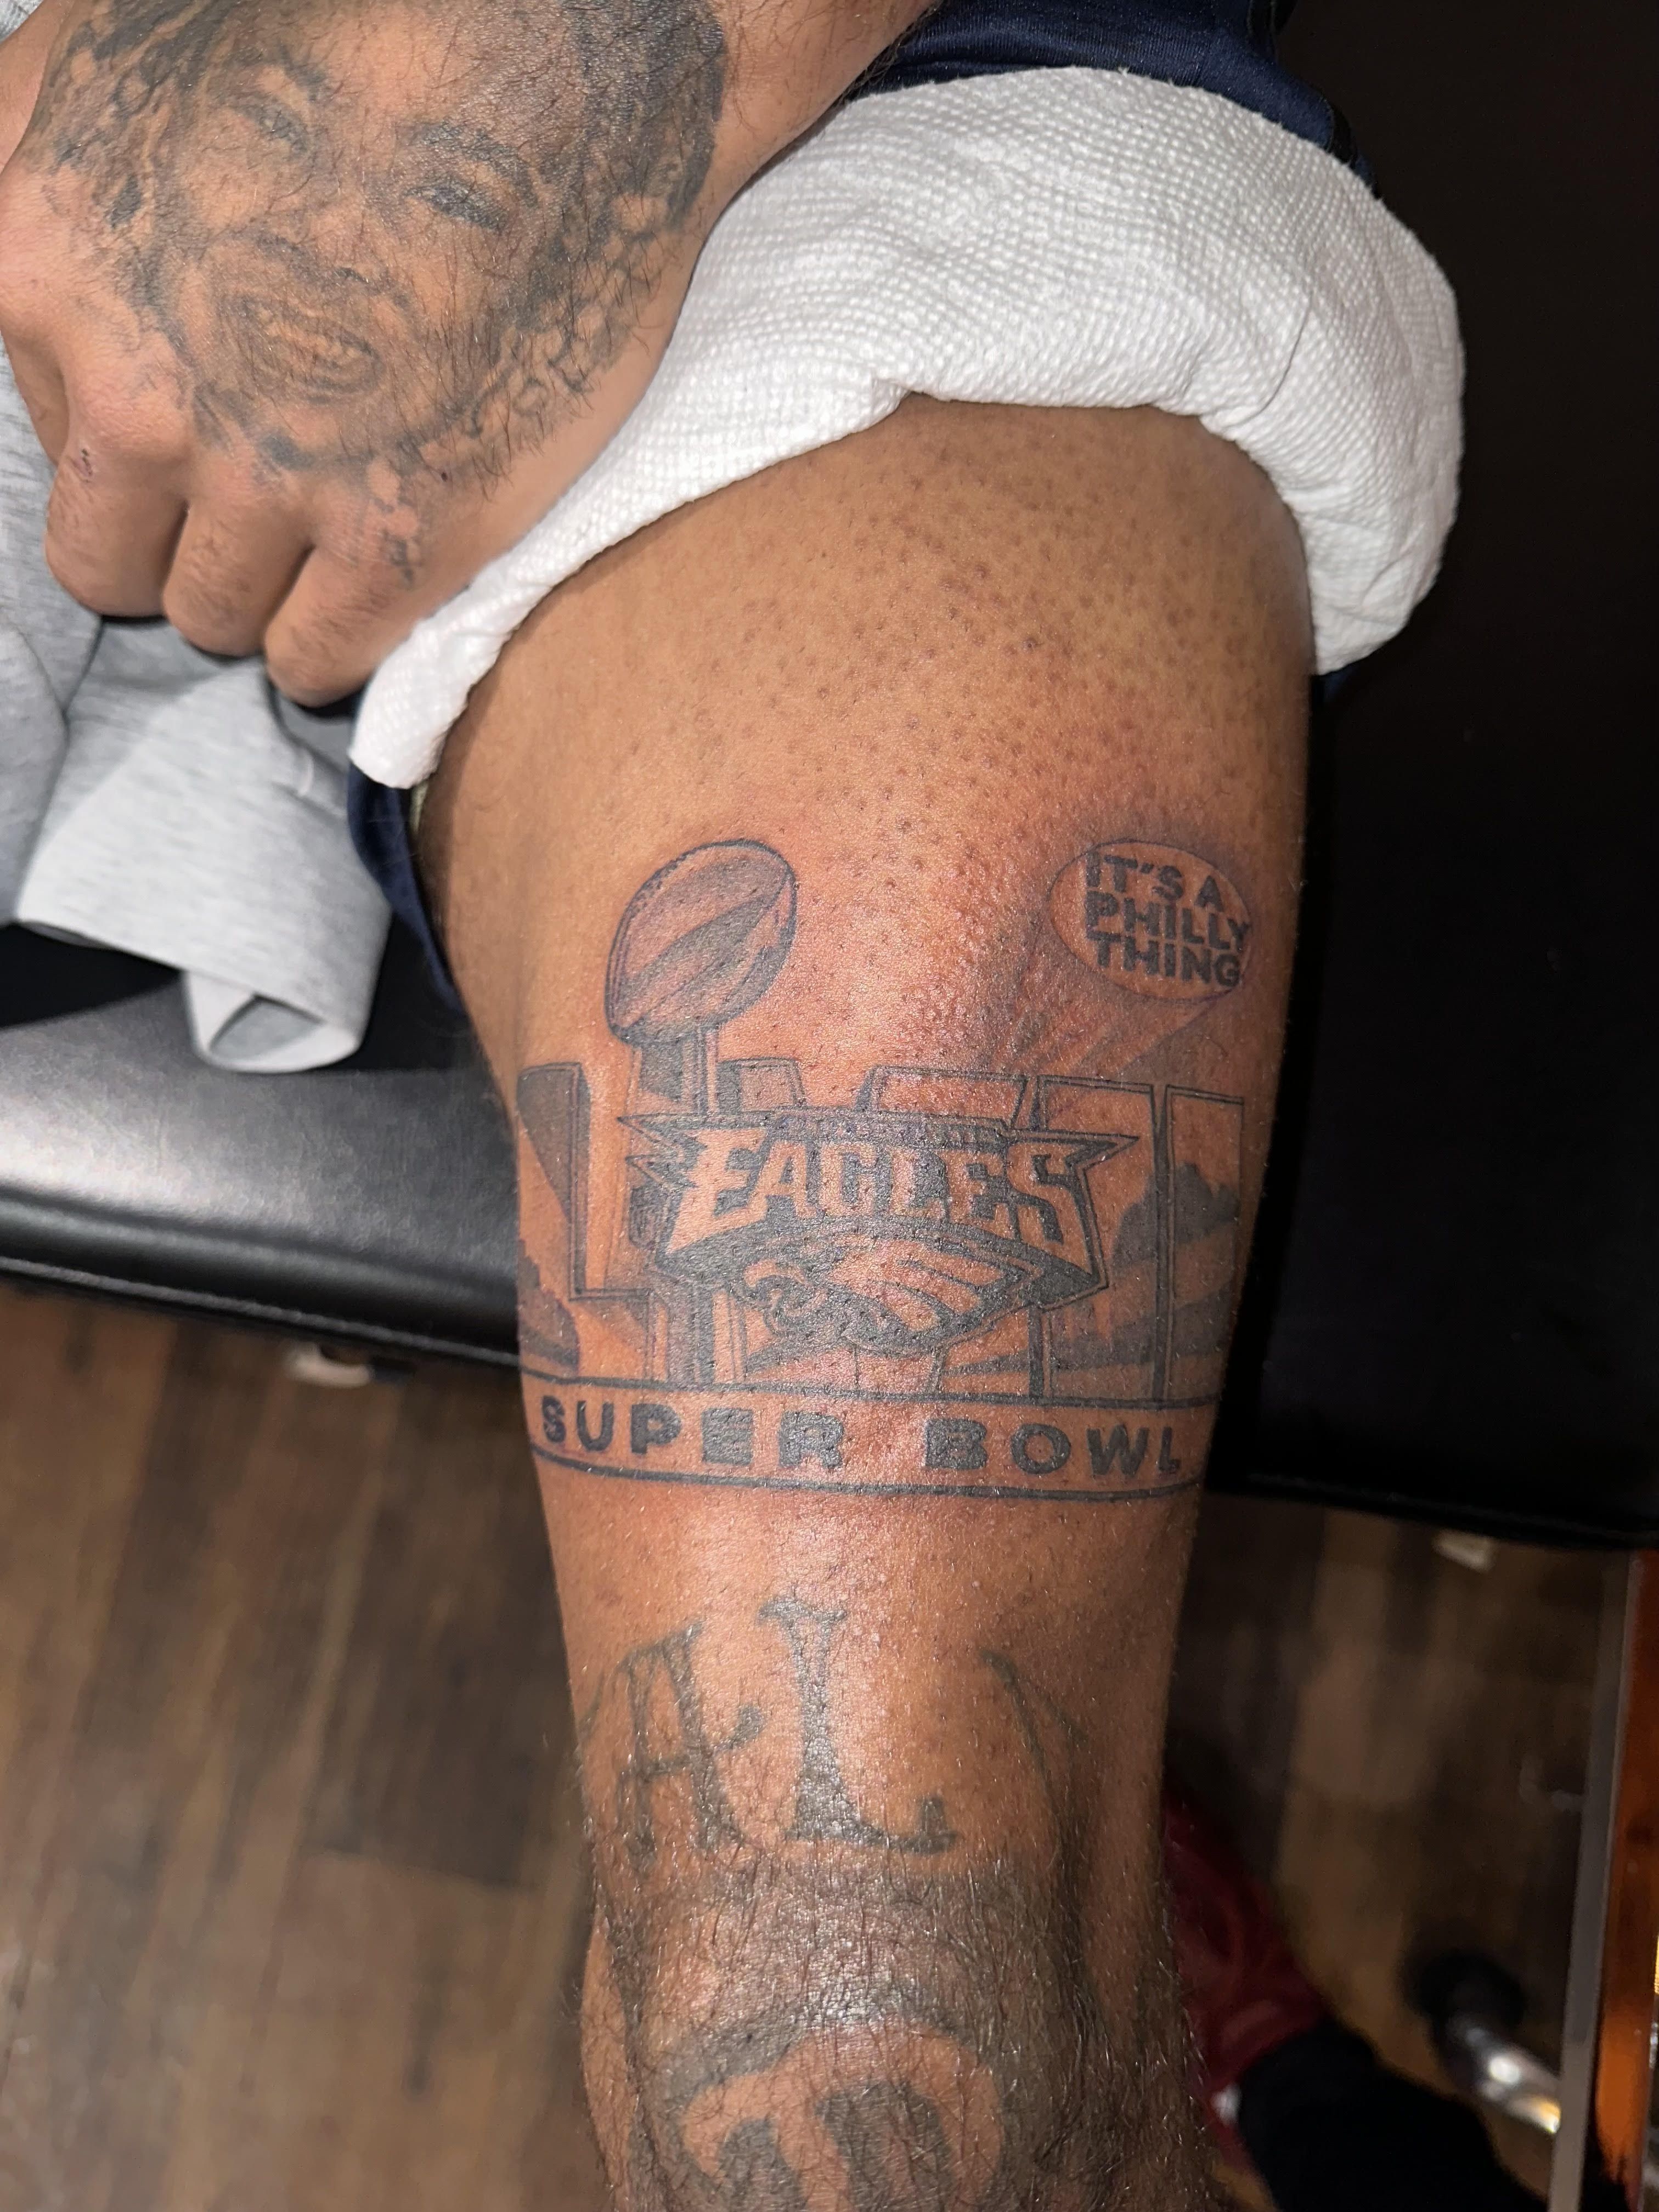 He got an Eagles Super Bowl LVII tattoo, then added a crying Michael Jordan when they lost